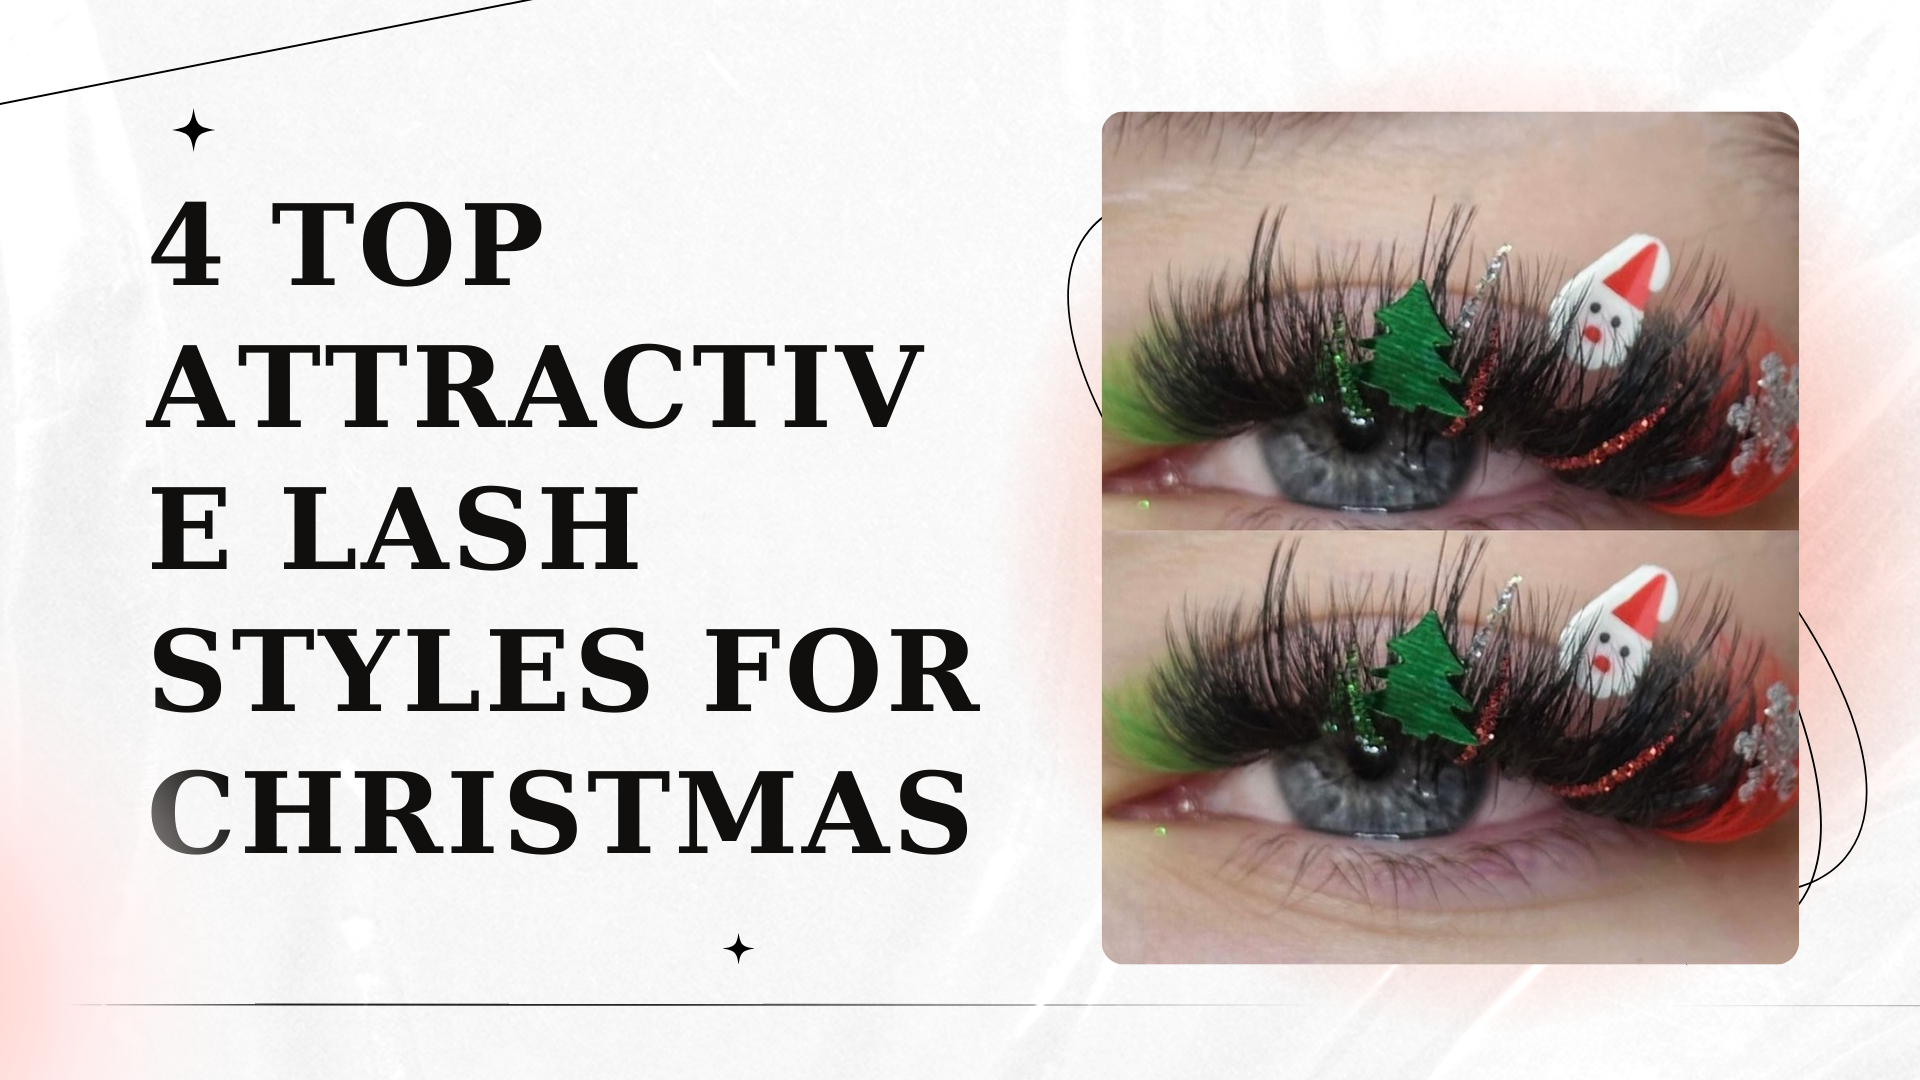 4 top attractive lash styles for Christmas